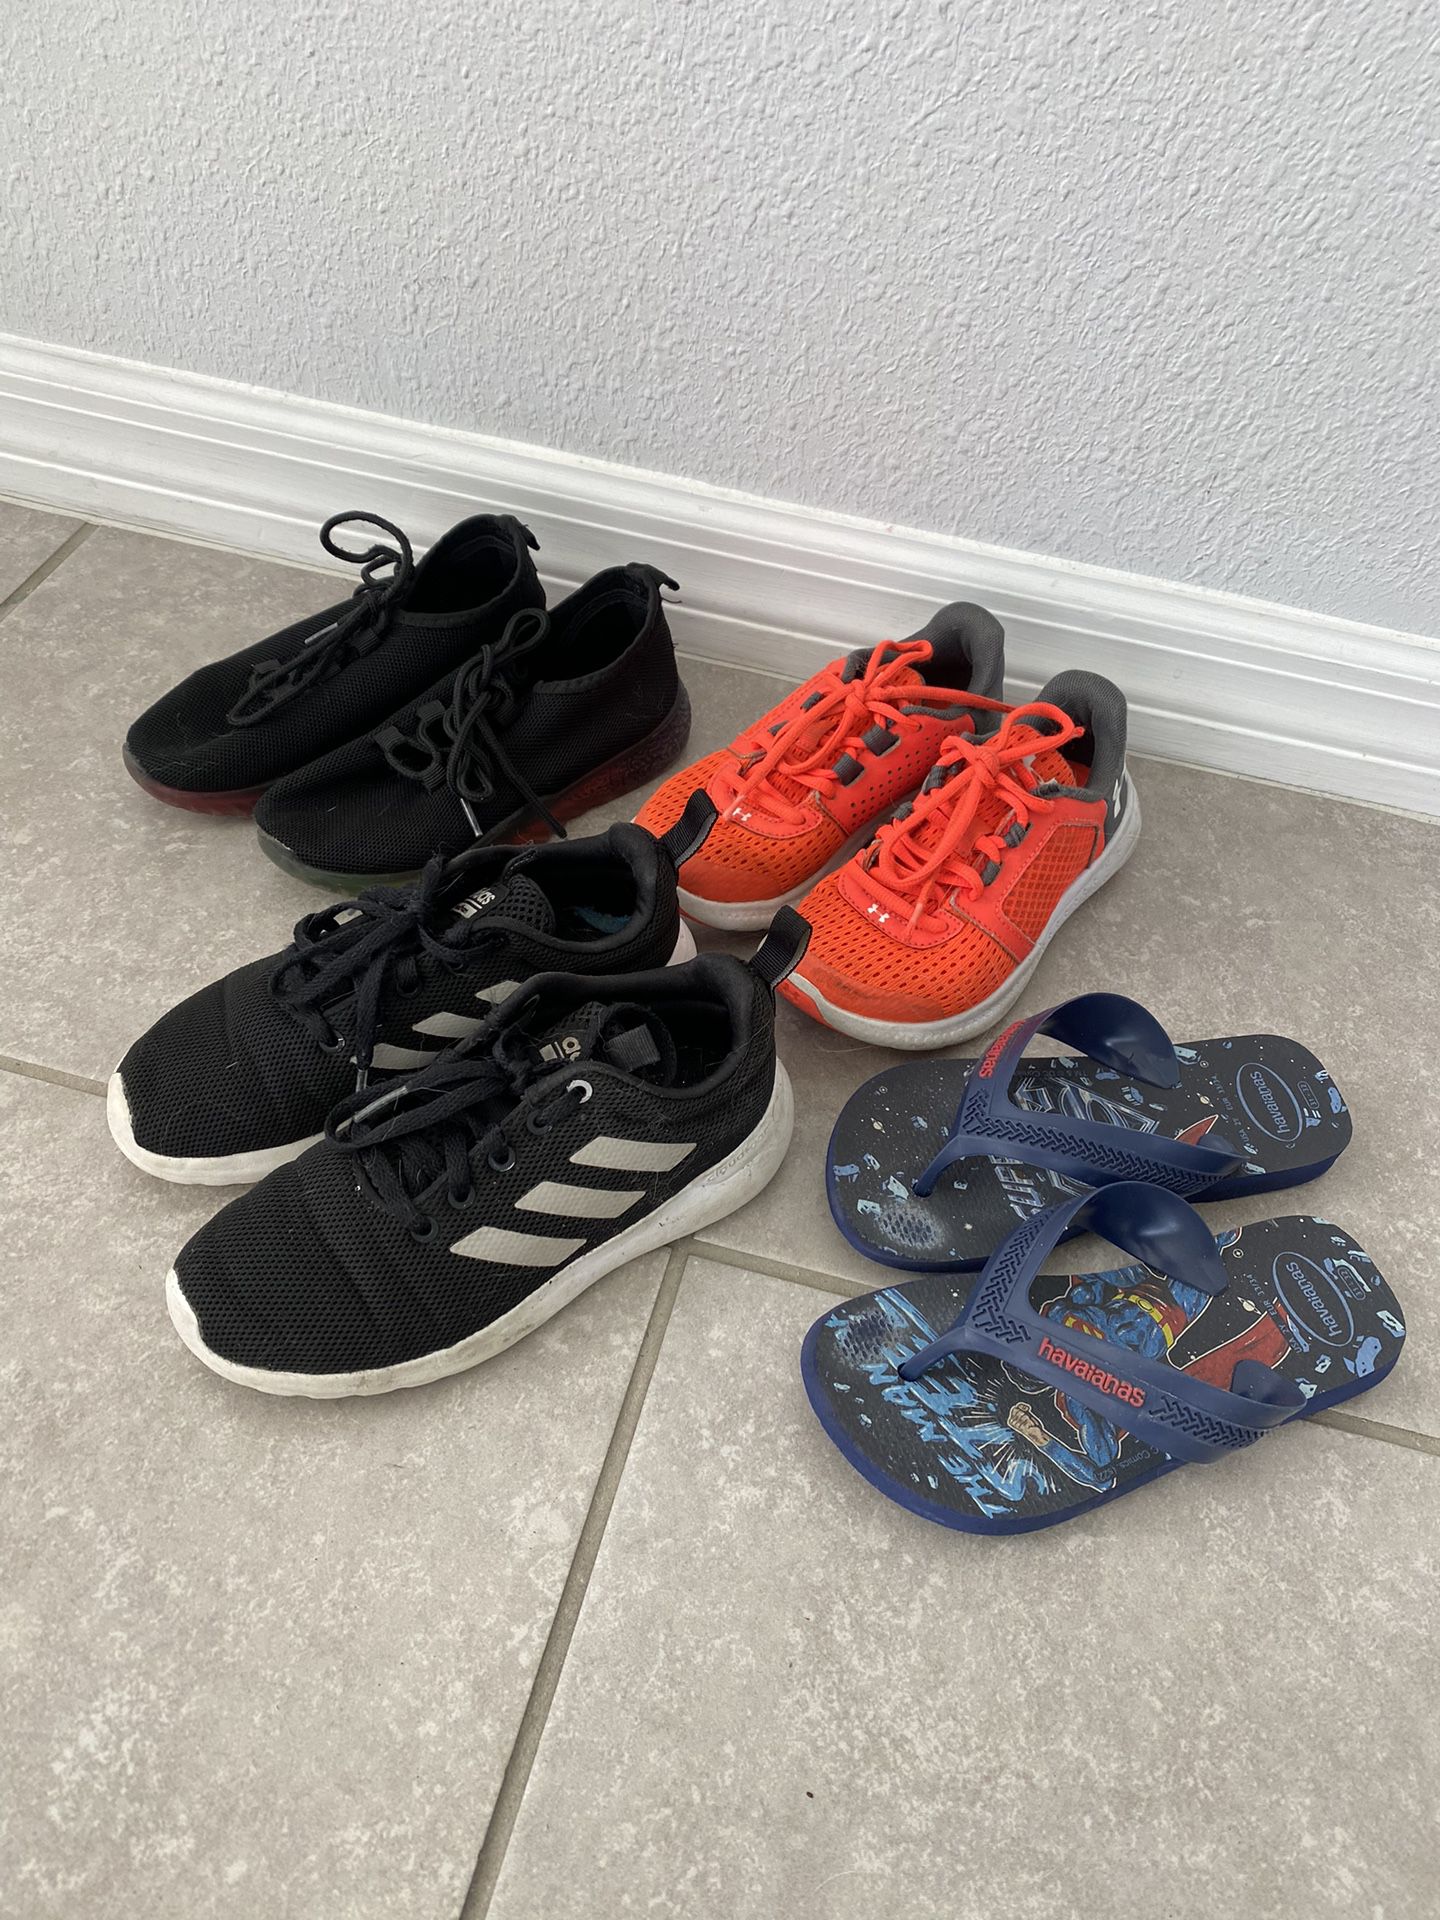 4 pairs of boys shoes bundle sneakers under armour, addidas and havaianas flip flops size 13 $30